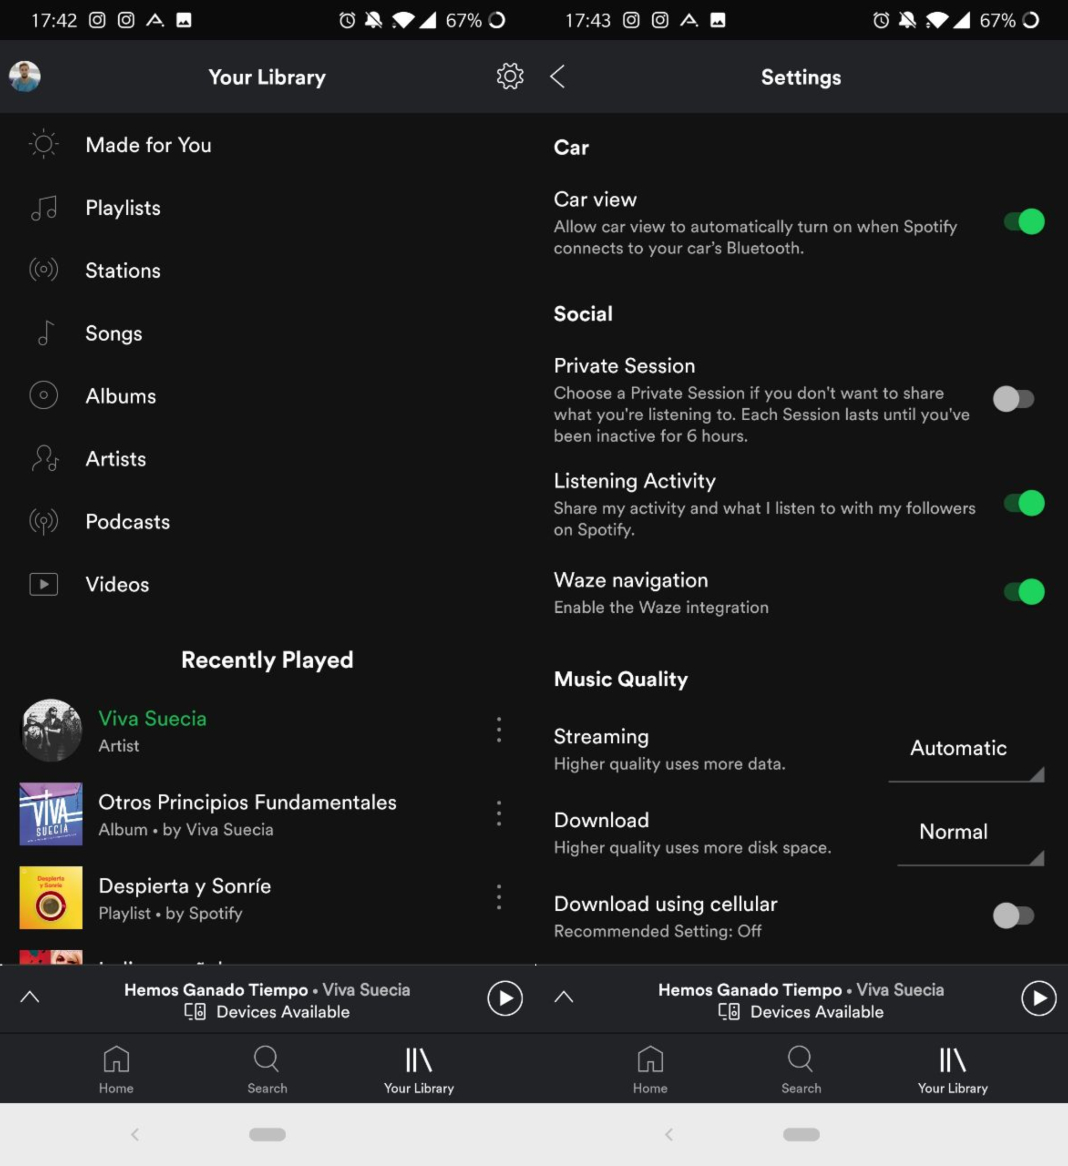 spotify car mode How to activate the car view in Spotify on Android